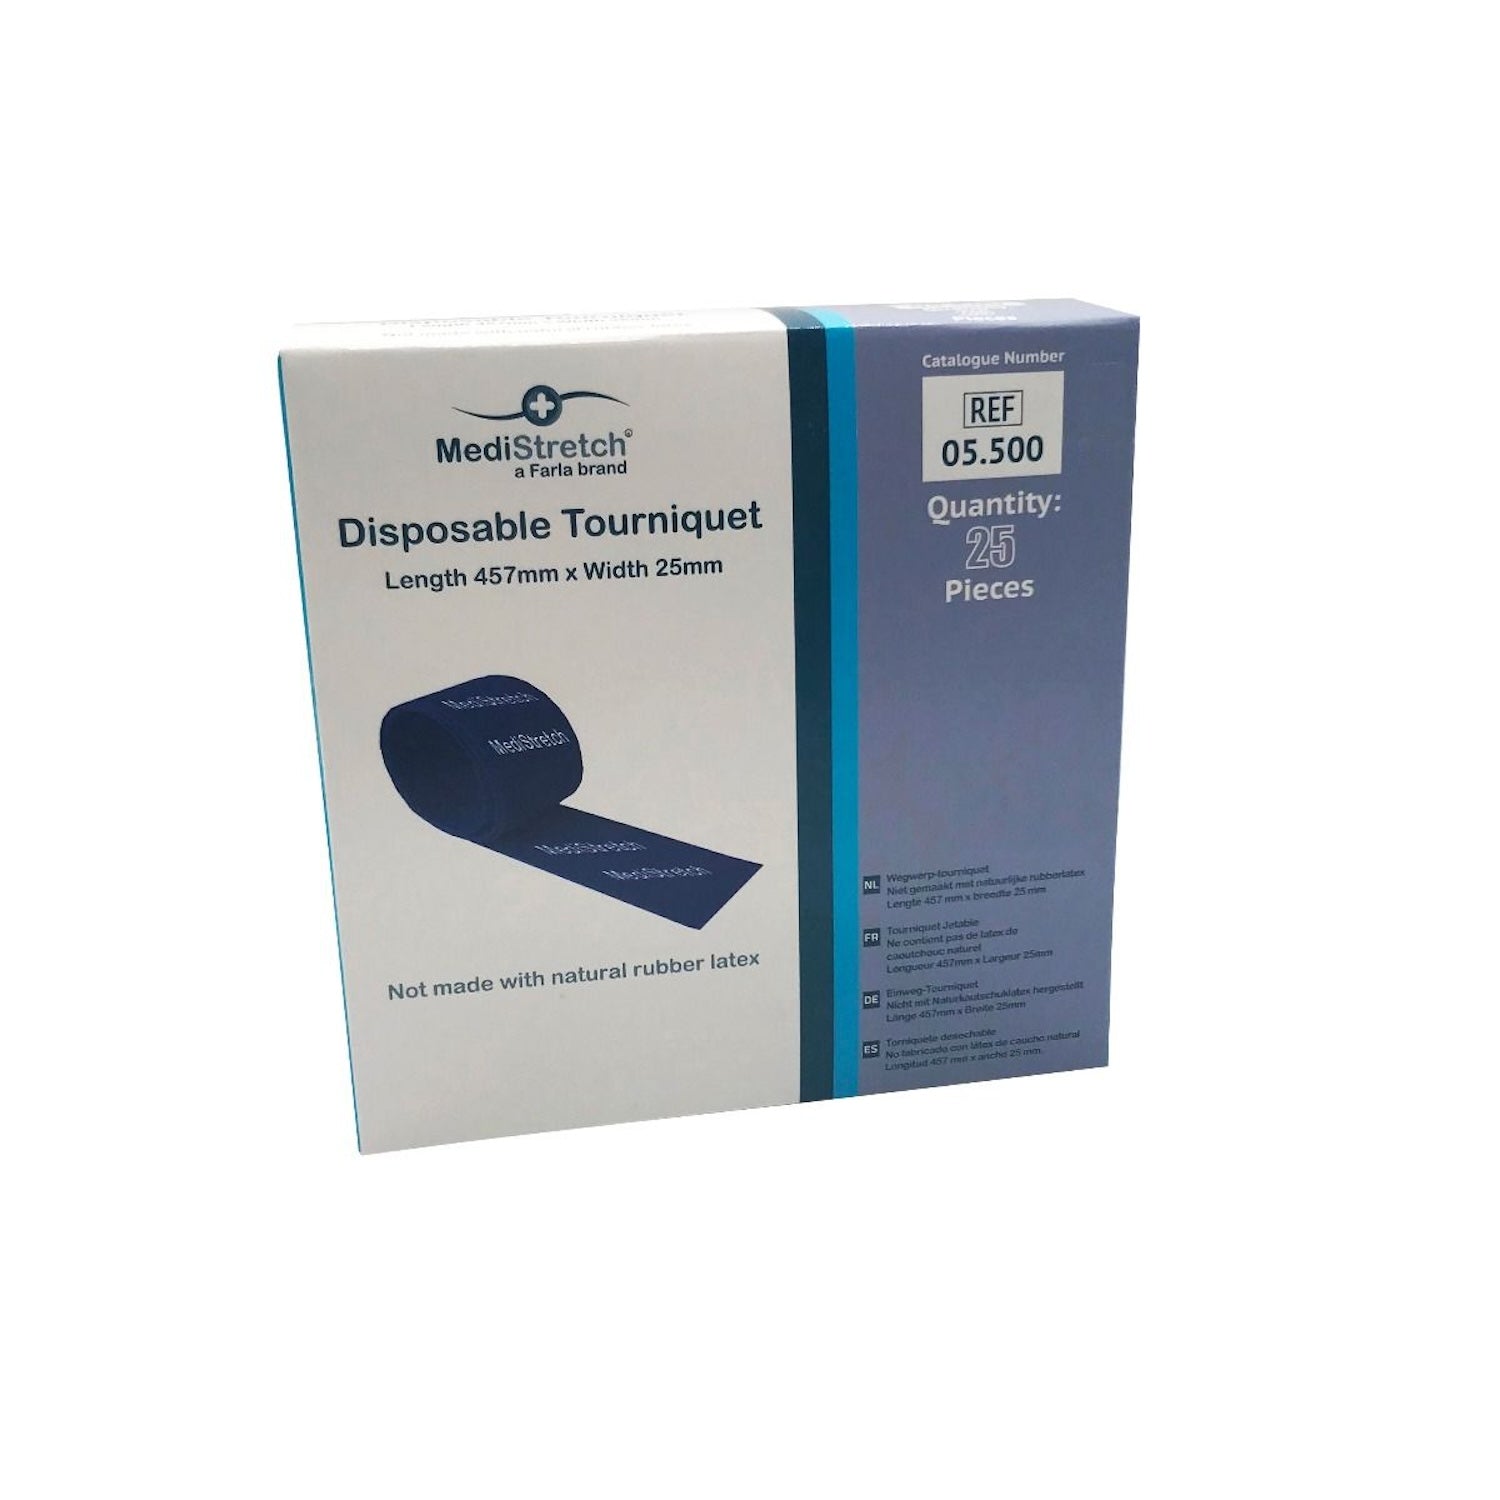 MediStretch Single Use Tourniquet | Pack of 25 (1)